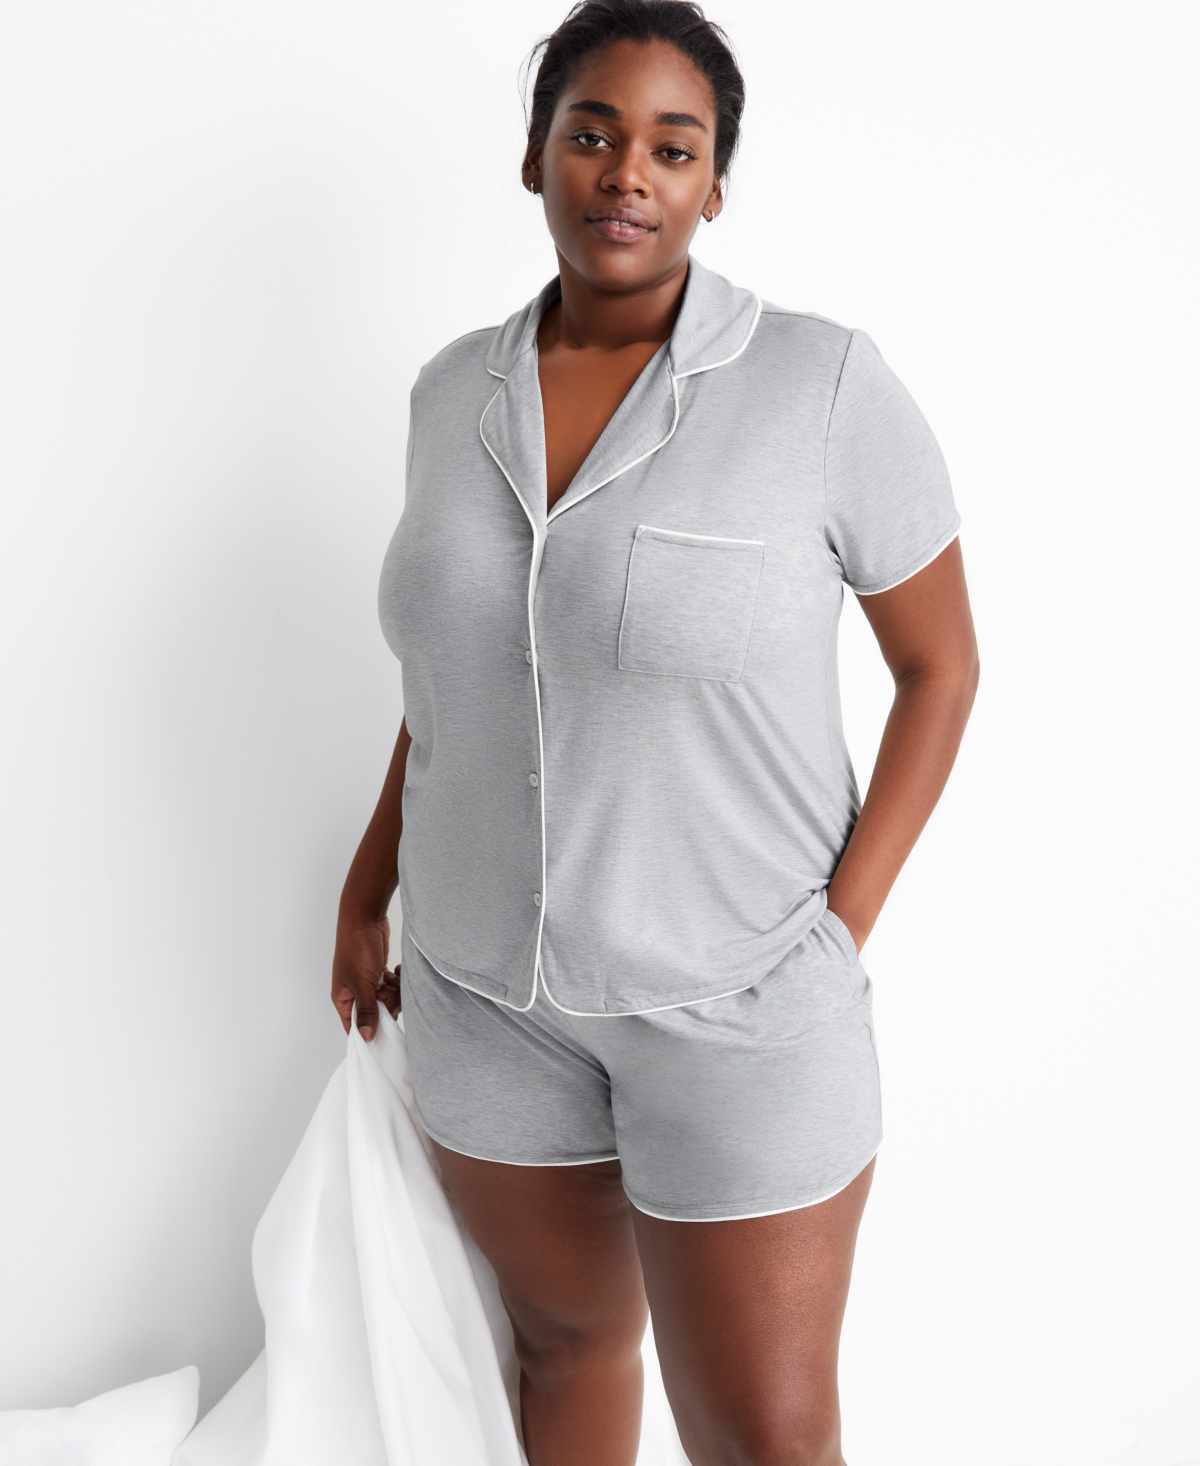 State Of Day Women's 2-pc. Short-sleeve Notched-collar Pajama Set Xs-3x, Created For Macy's In Sleep Grey Heather